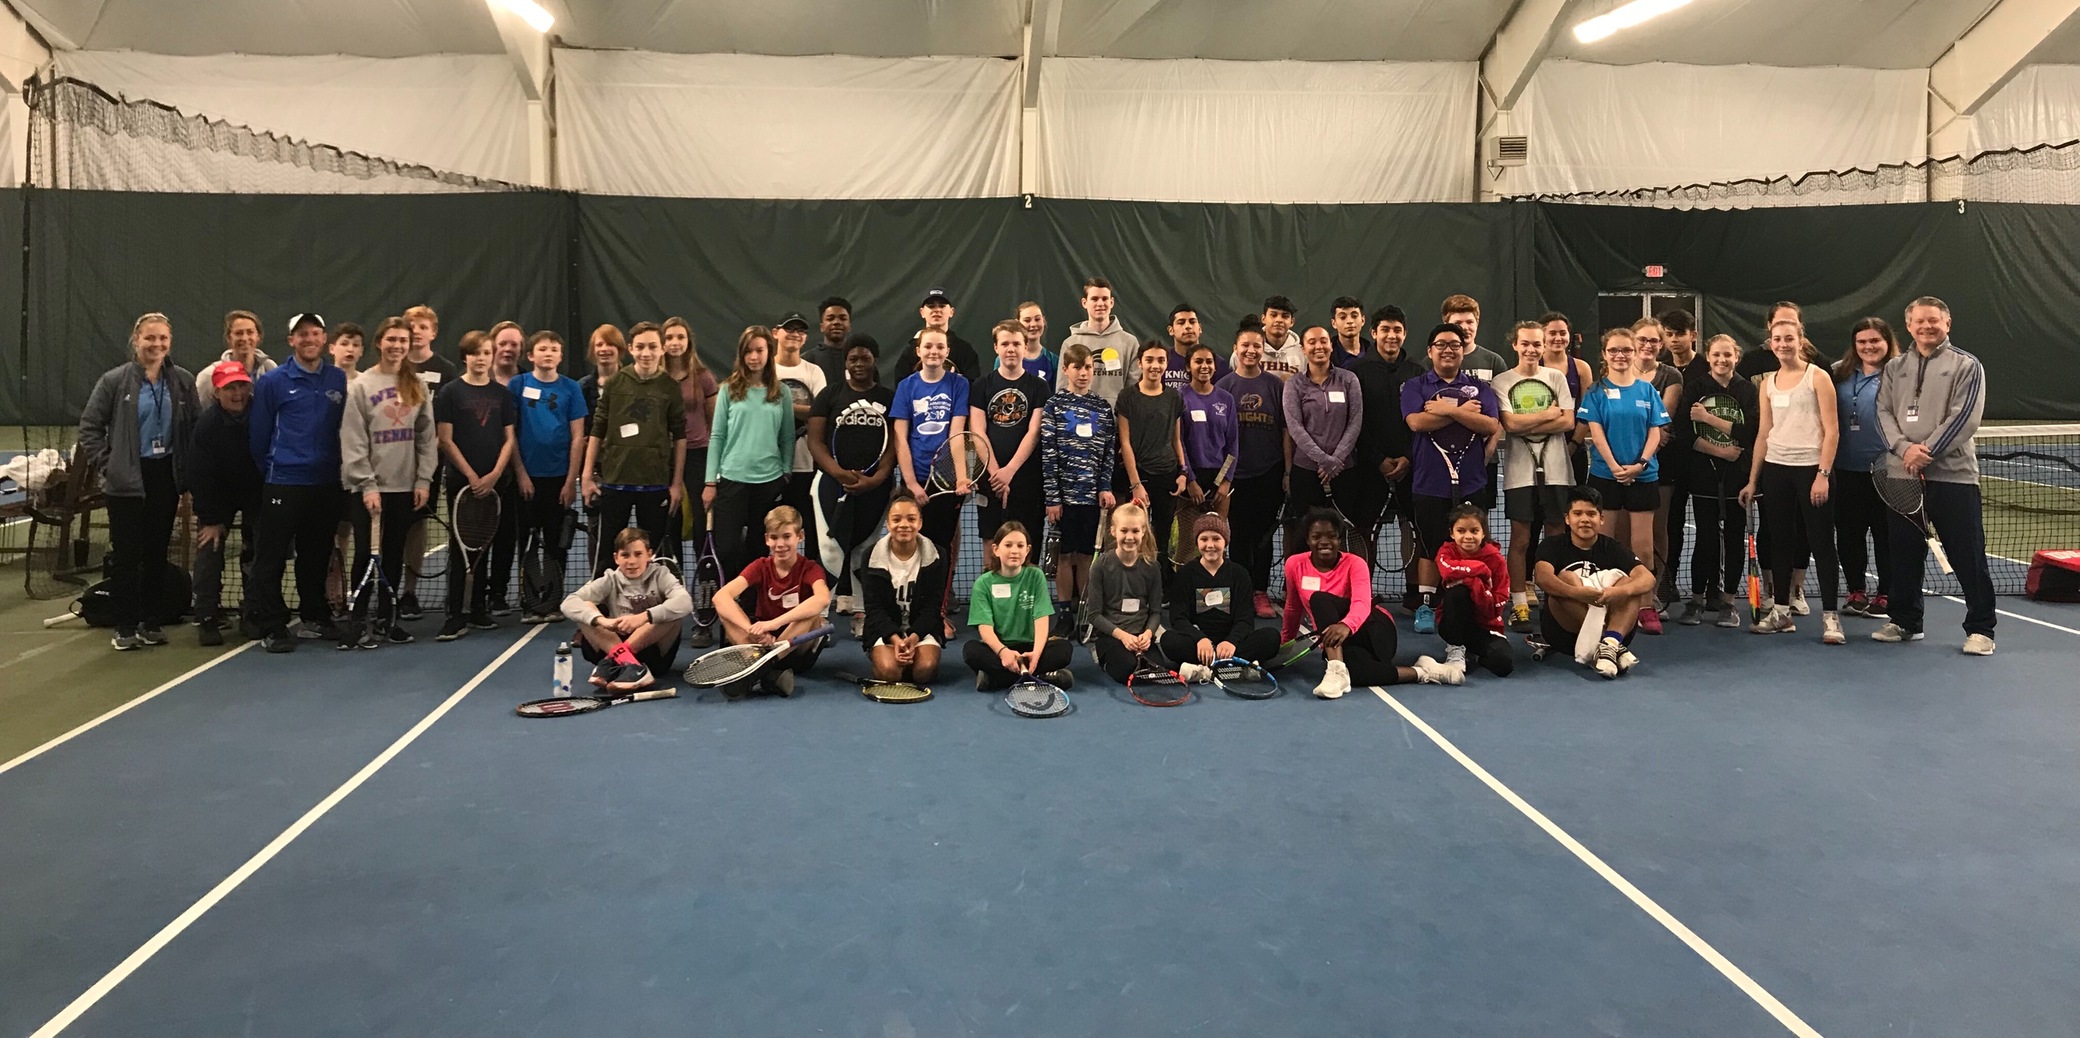 BC Women’s Tennis Volunteers, Experiences Fed Cup in Asheville